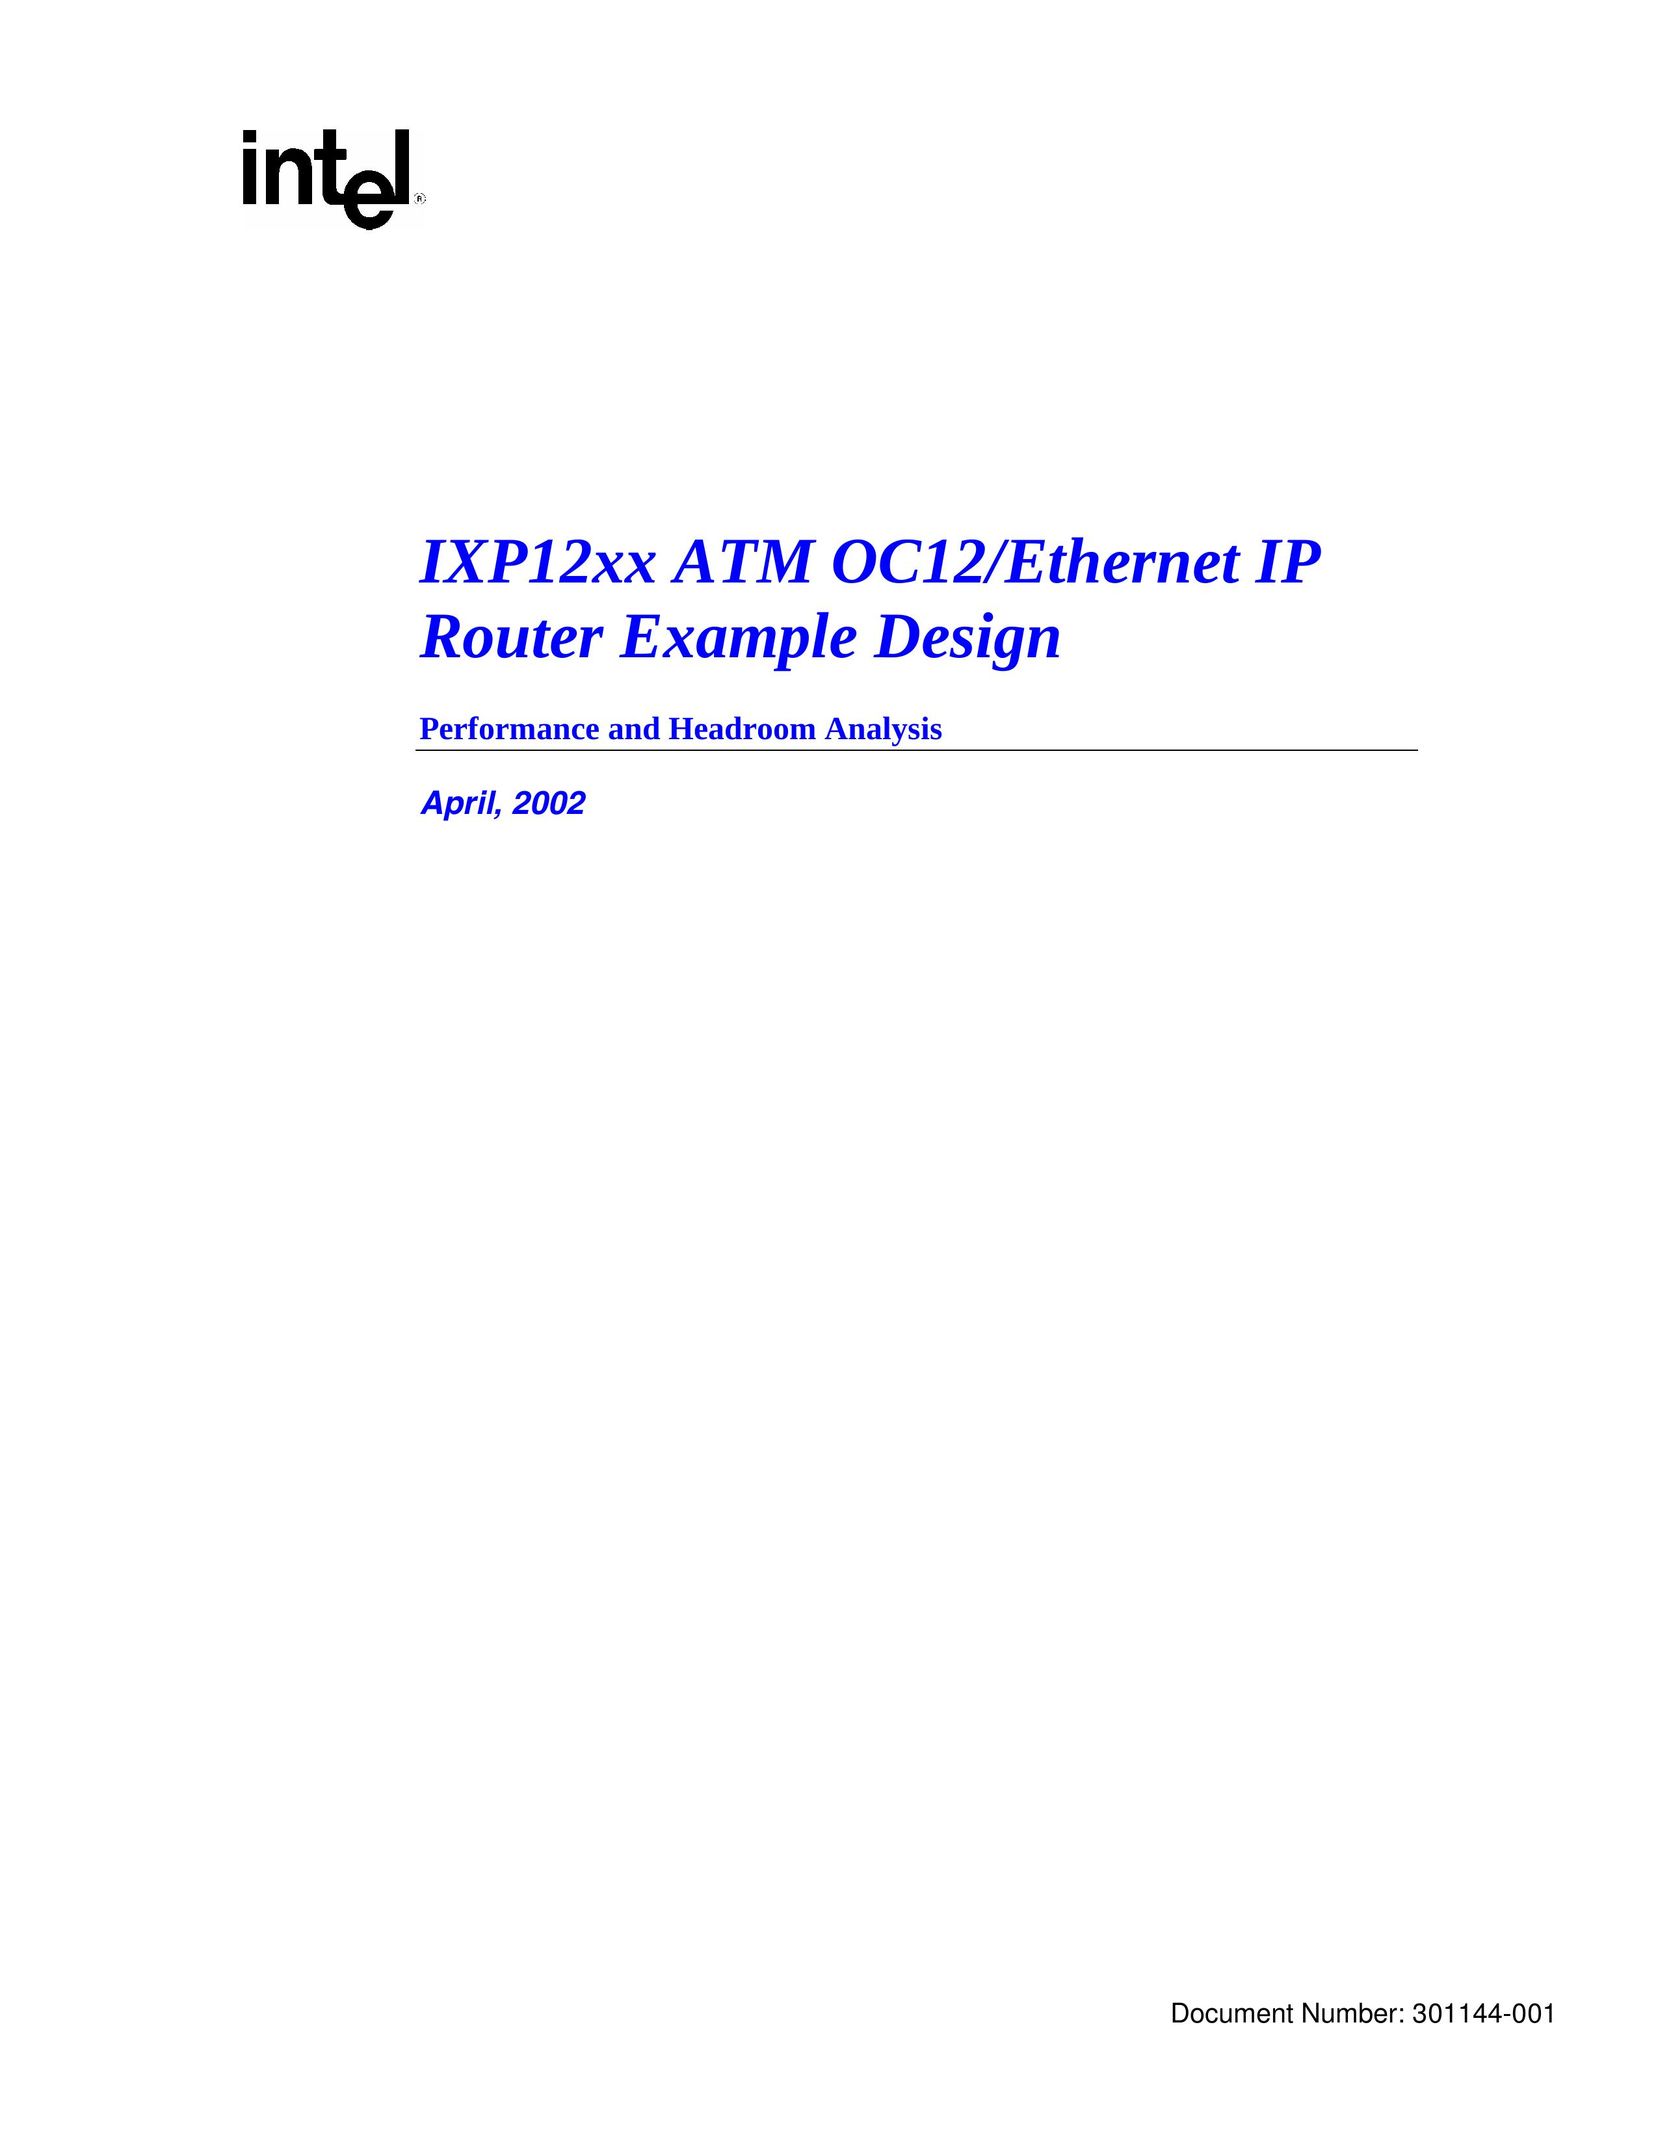 Intel IXP12xx Network Router User Manual